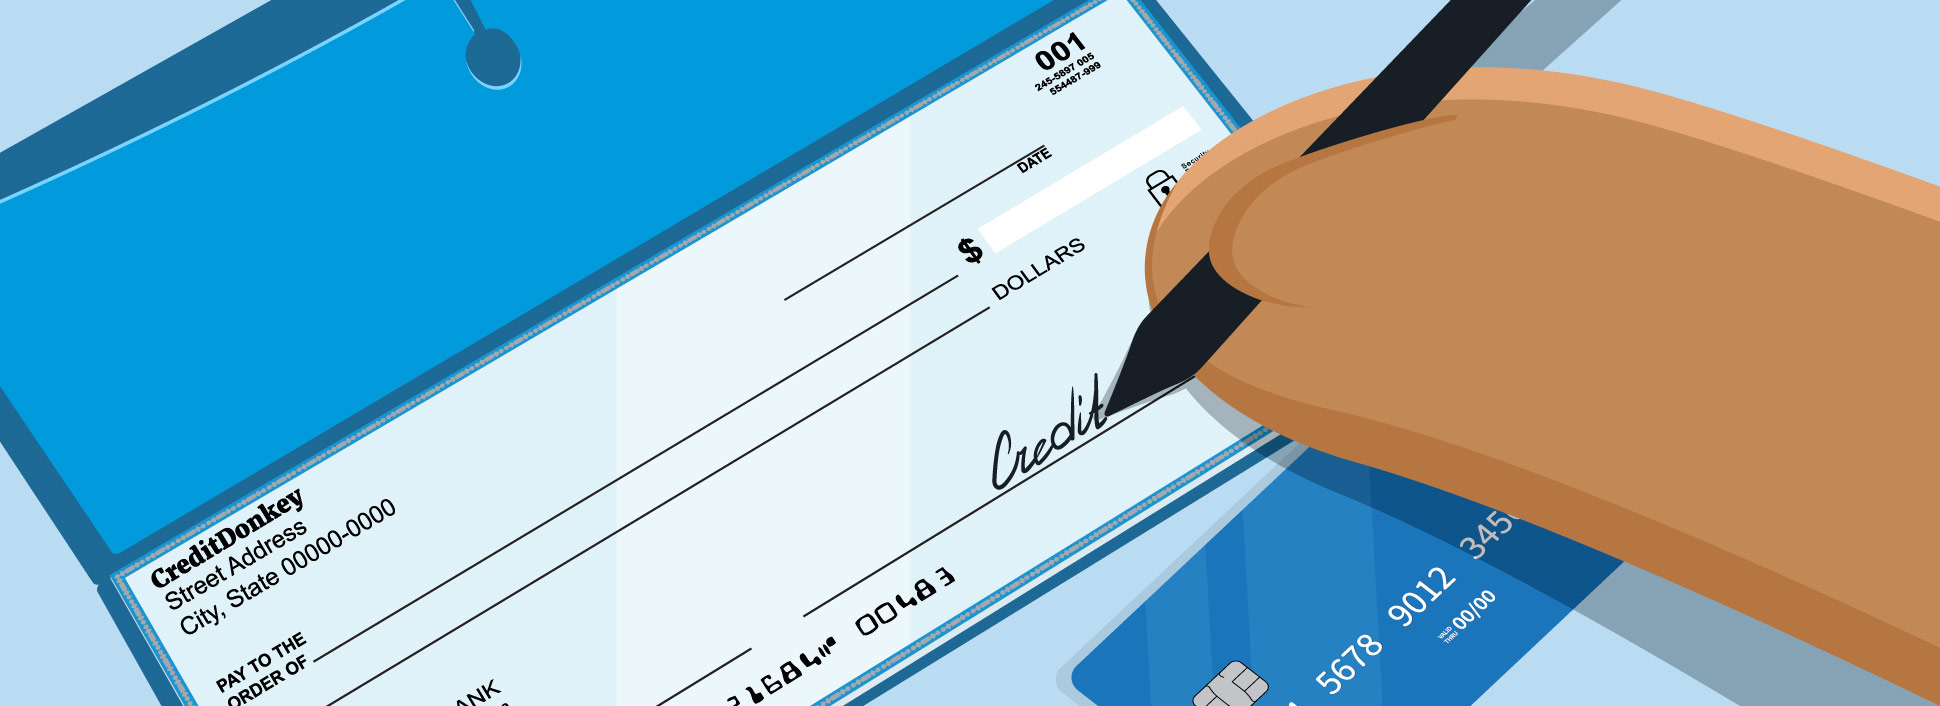 What Is Required When Opening A Checking Account